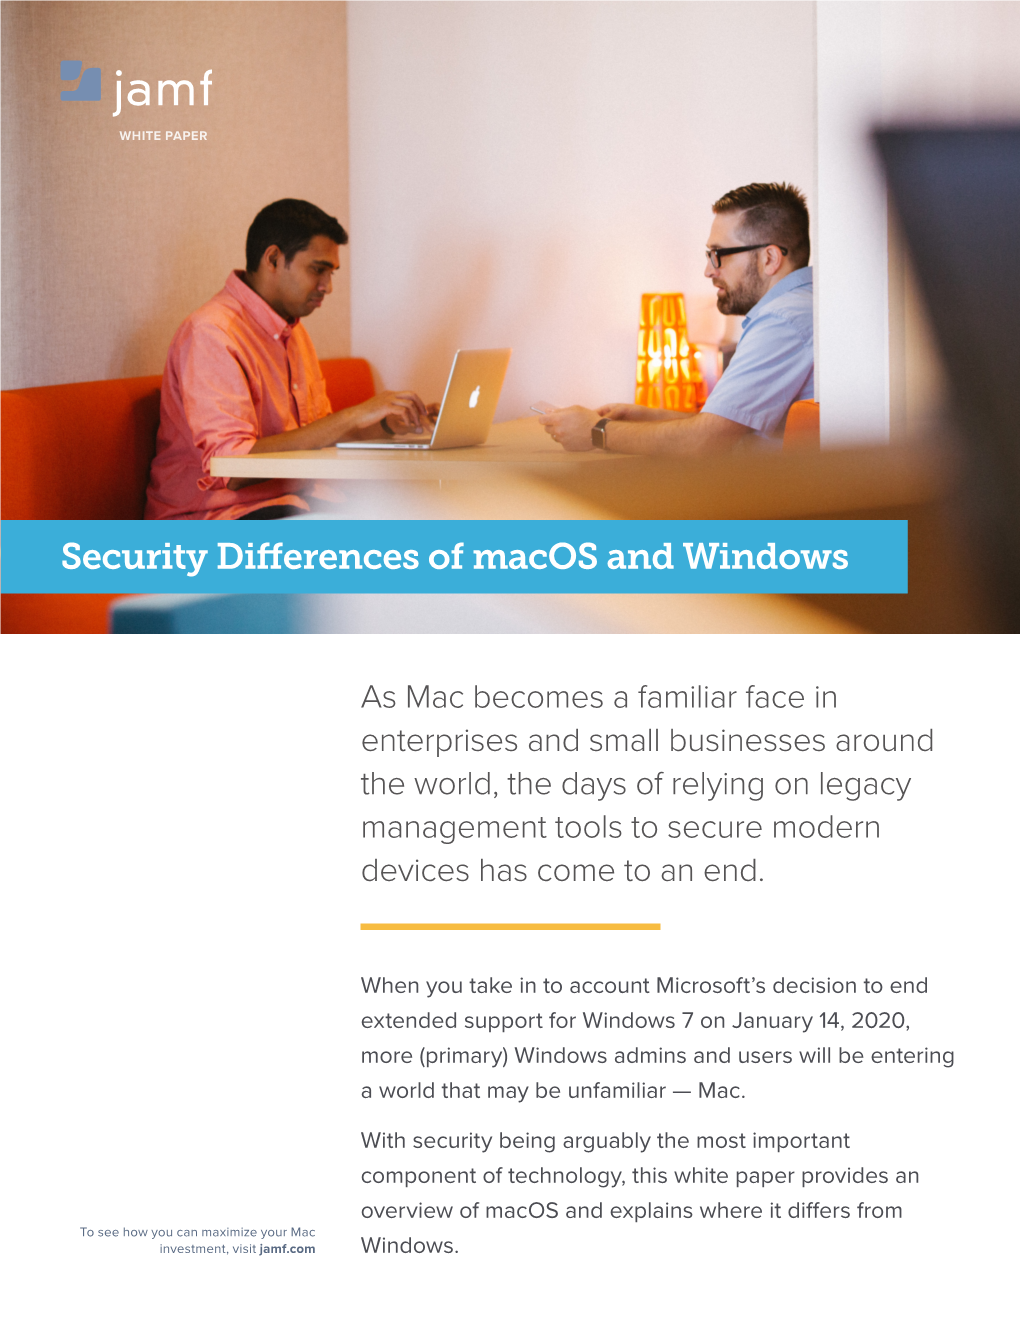 Security Differences of Macos and Windows